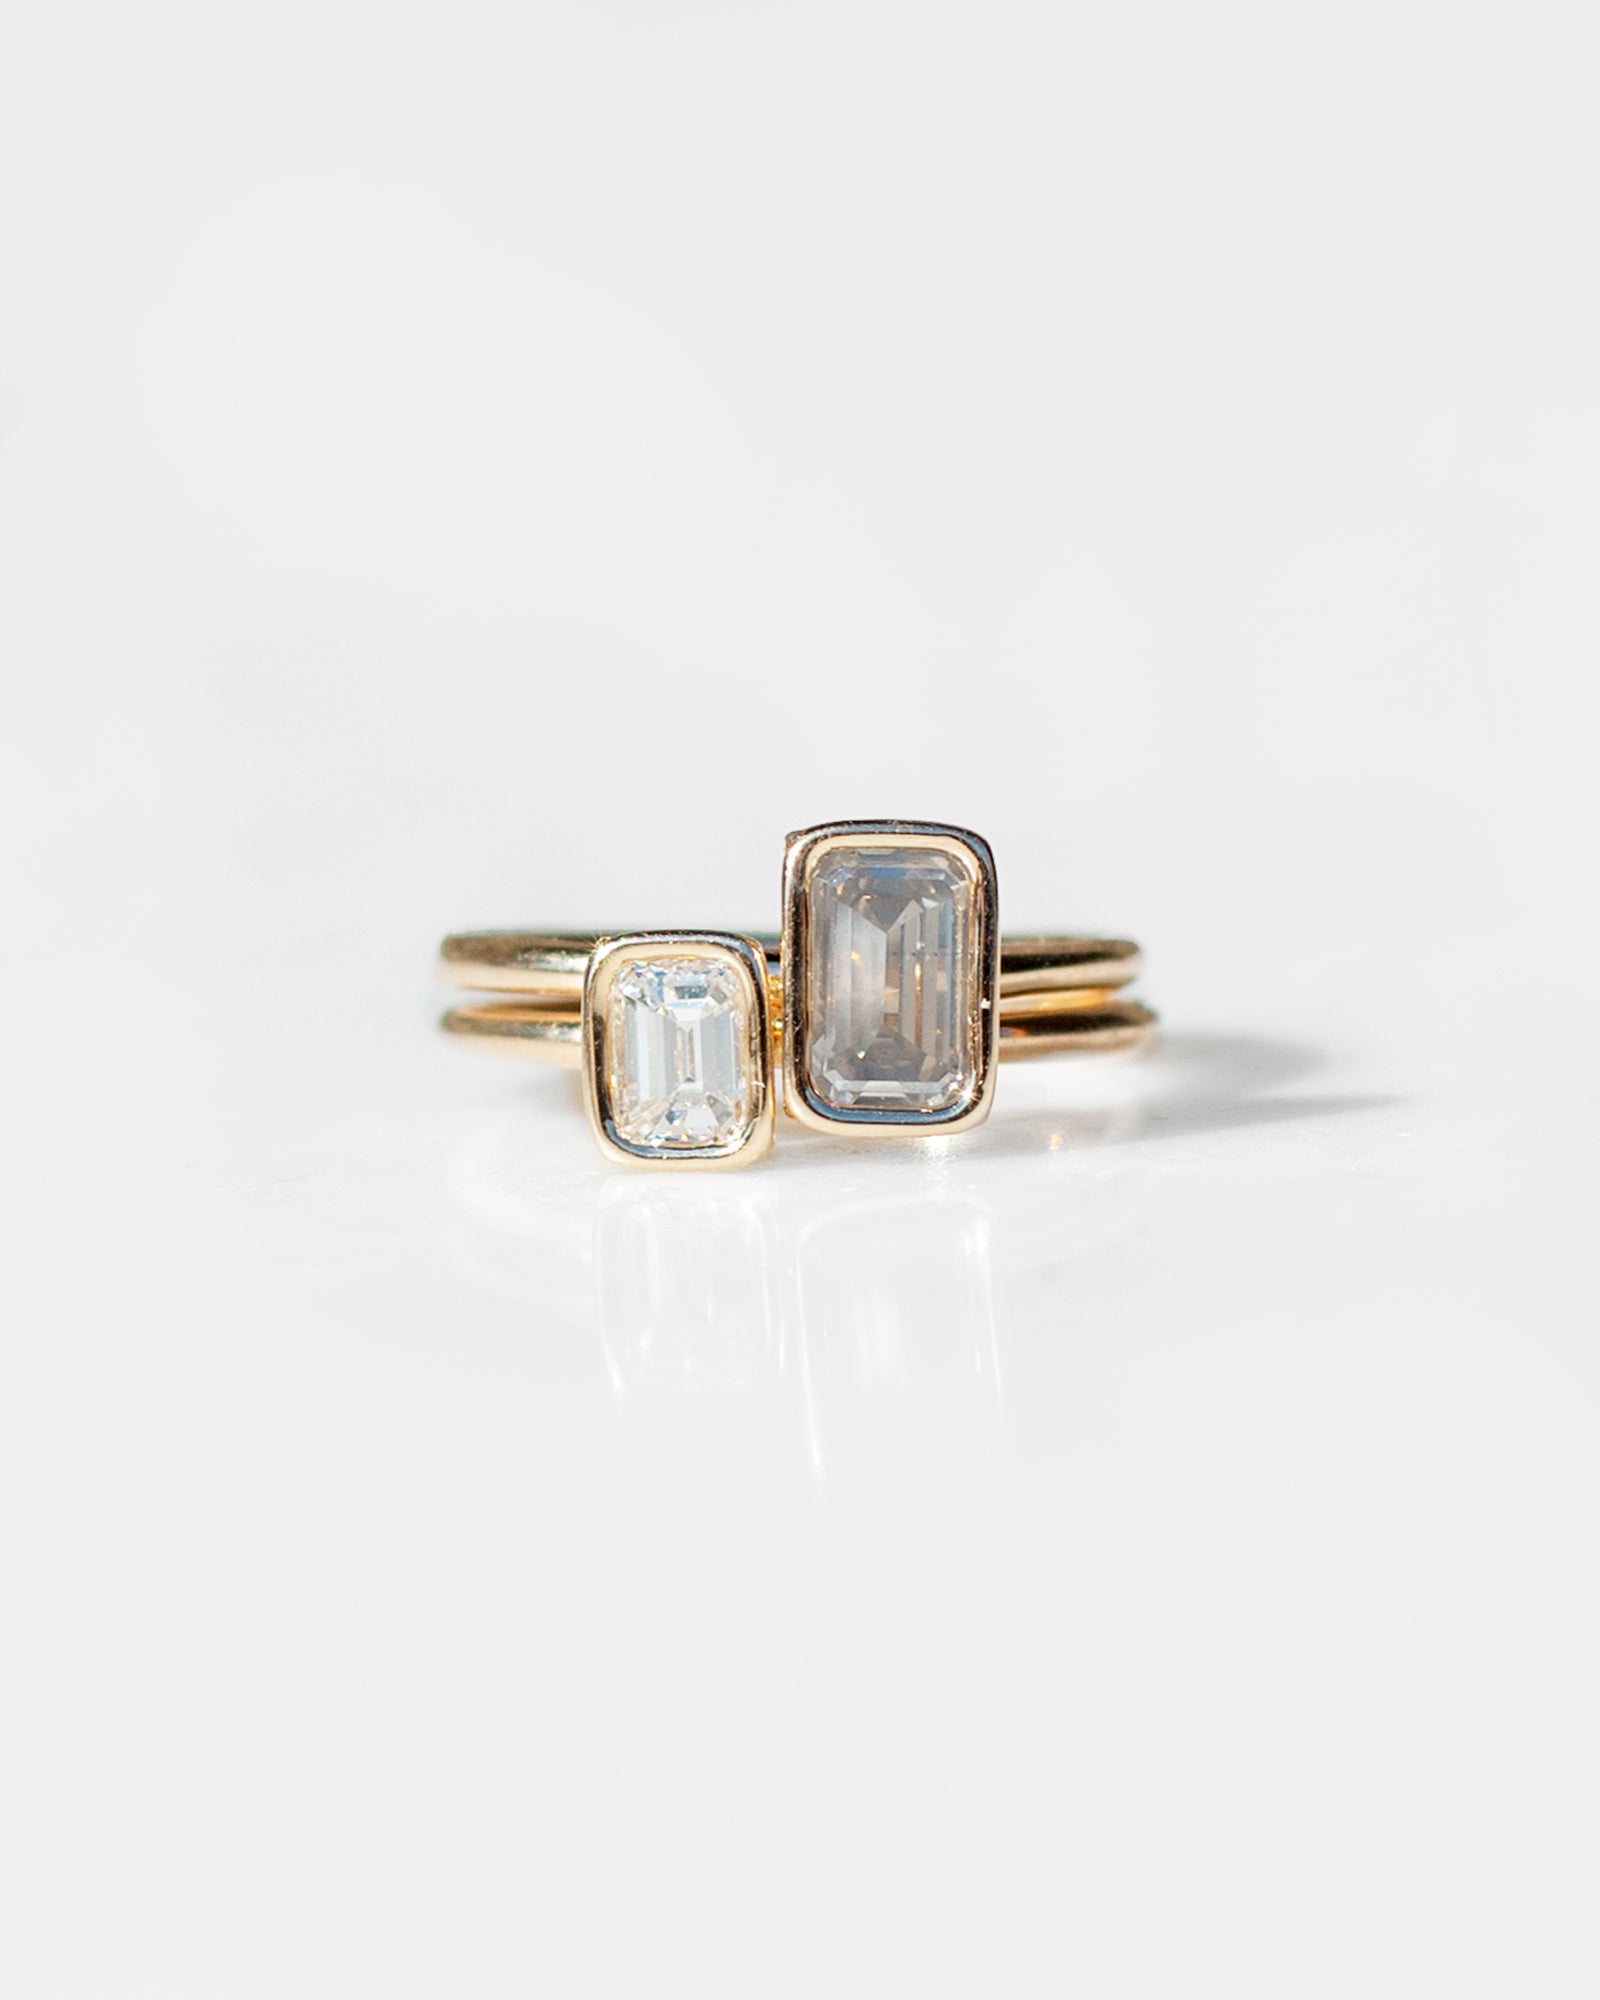 Toi et Moi Diamond Floating Rings - Blue Grey and White Emerald Cut